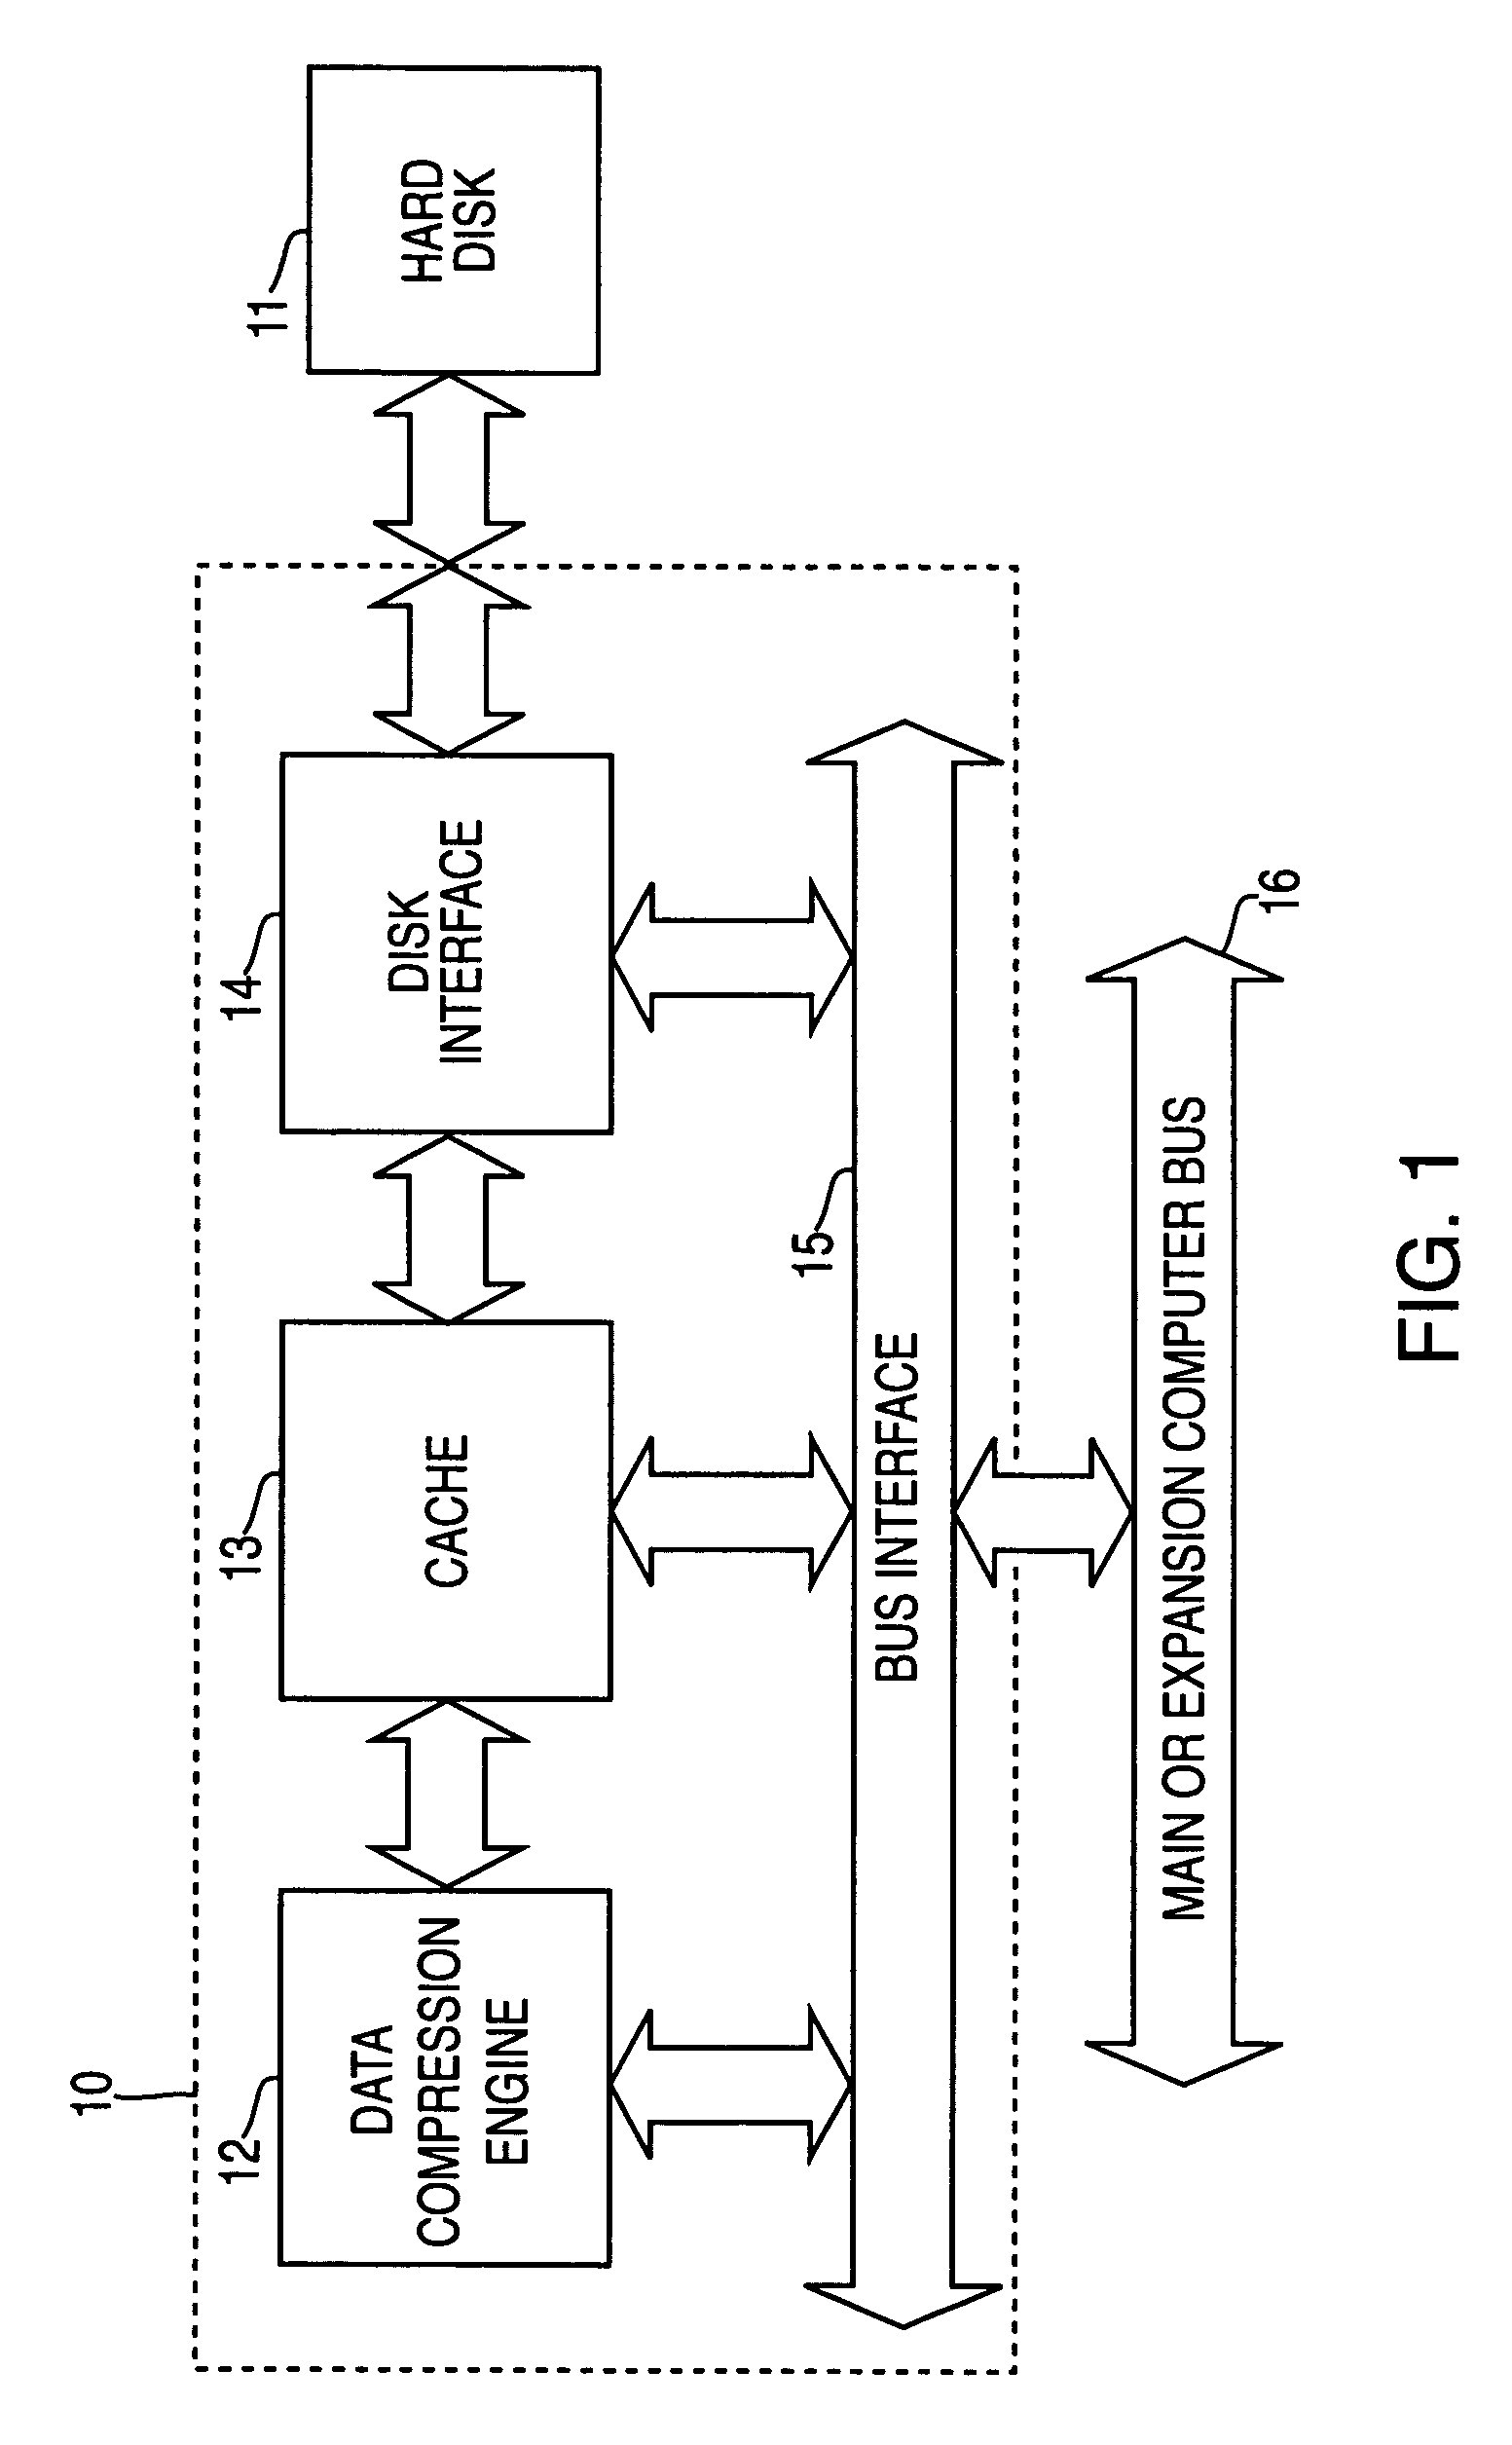 Systems and methods for accelerated loading of operating systems and application programs